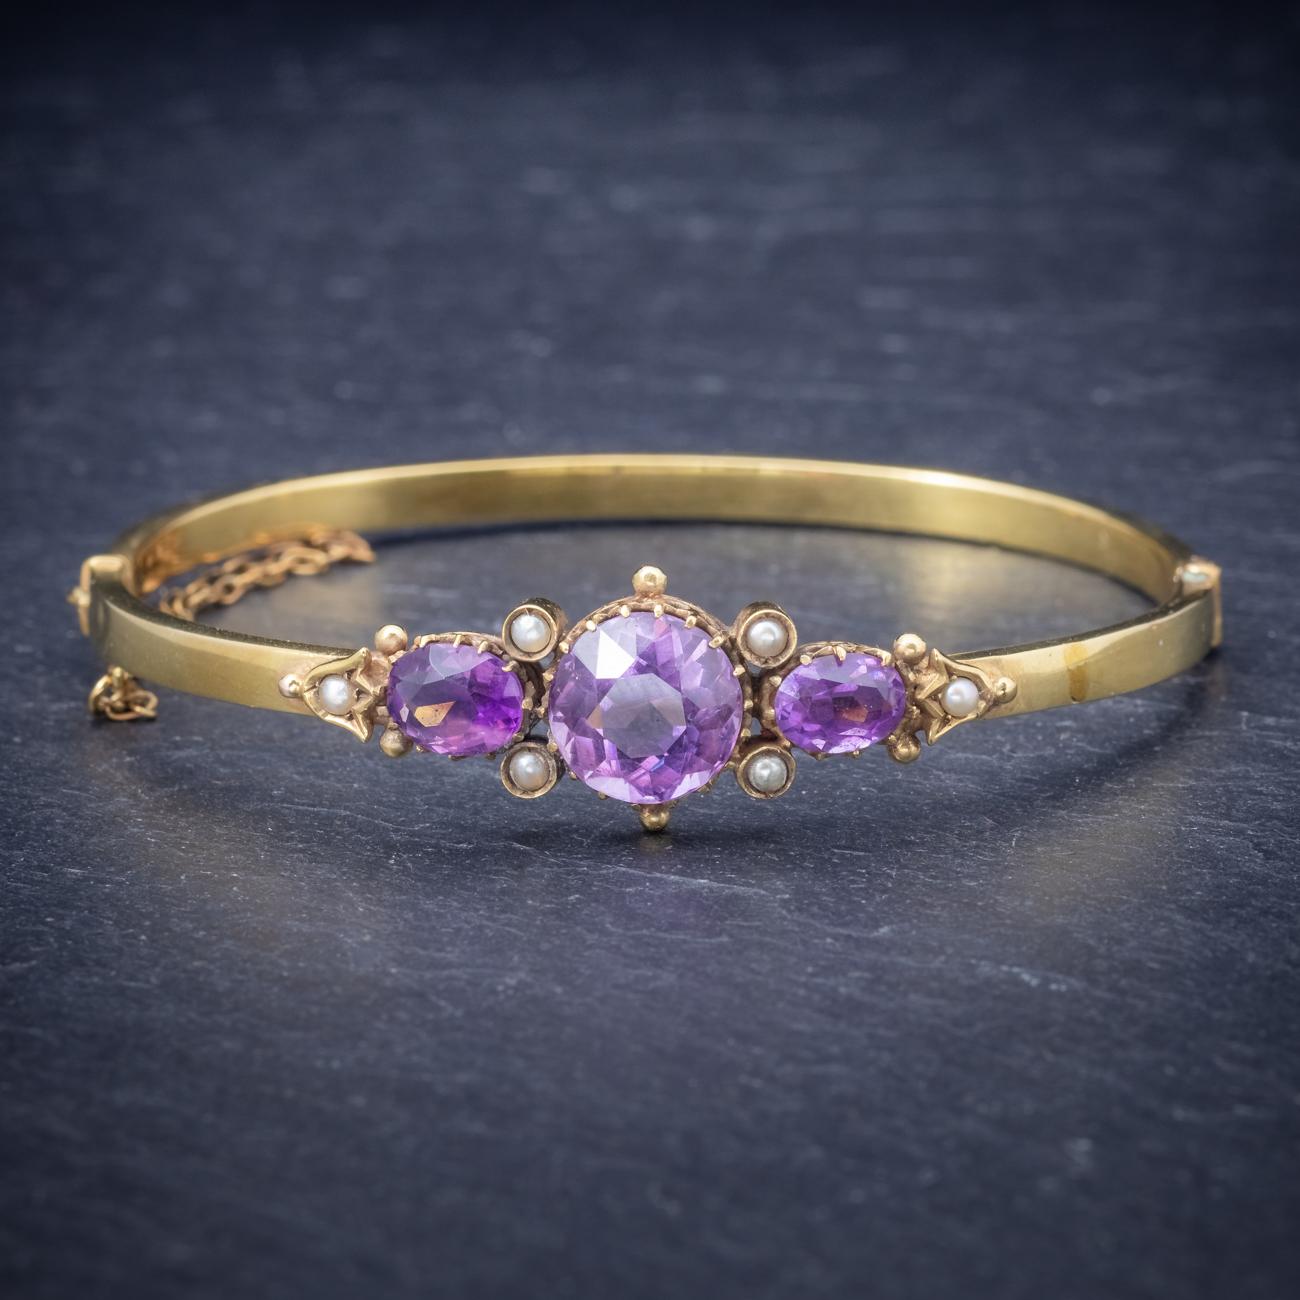 A fabulous antique Victorian bangle adorned with Pearls and a trilogy of beautiful Amethysts the largest of which is 4ct flanked by smaller 3ct stones. The bangle is fashioned in 9ct Yellow Gold and fitted with a safety chain on the clasp. It looks